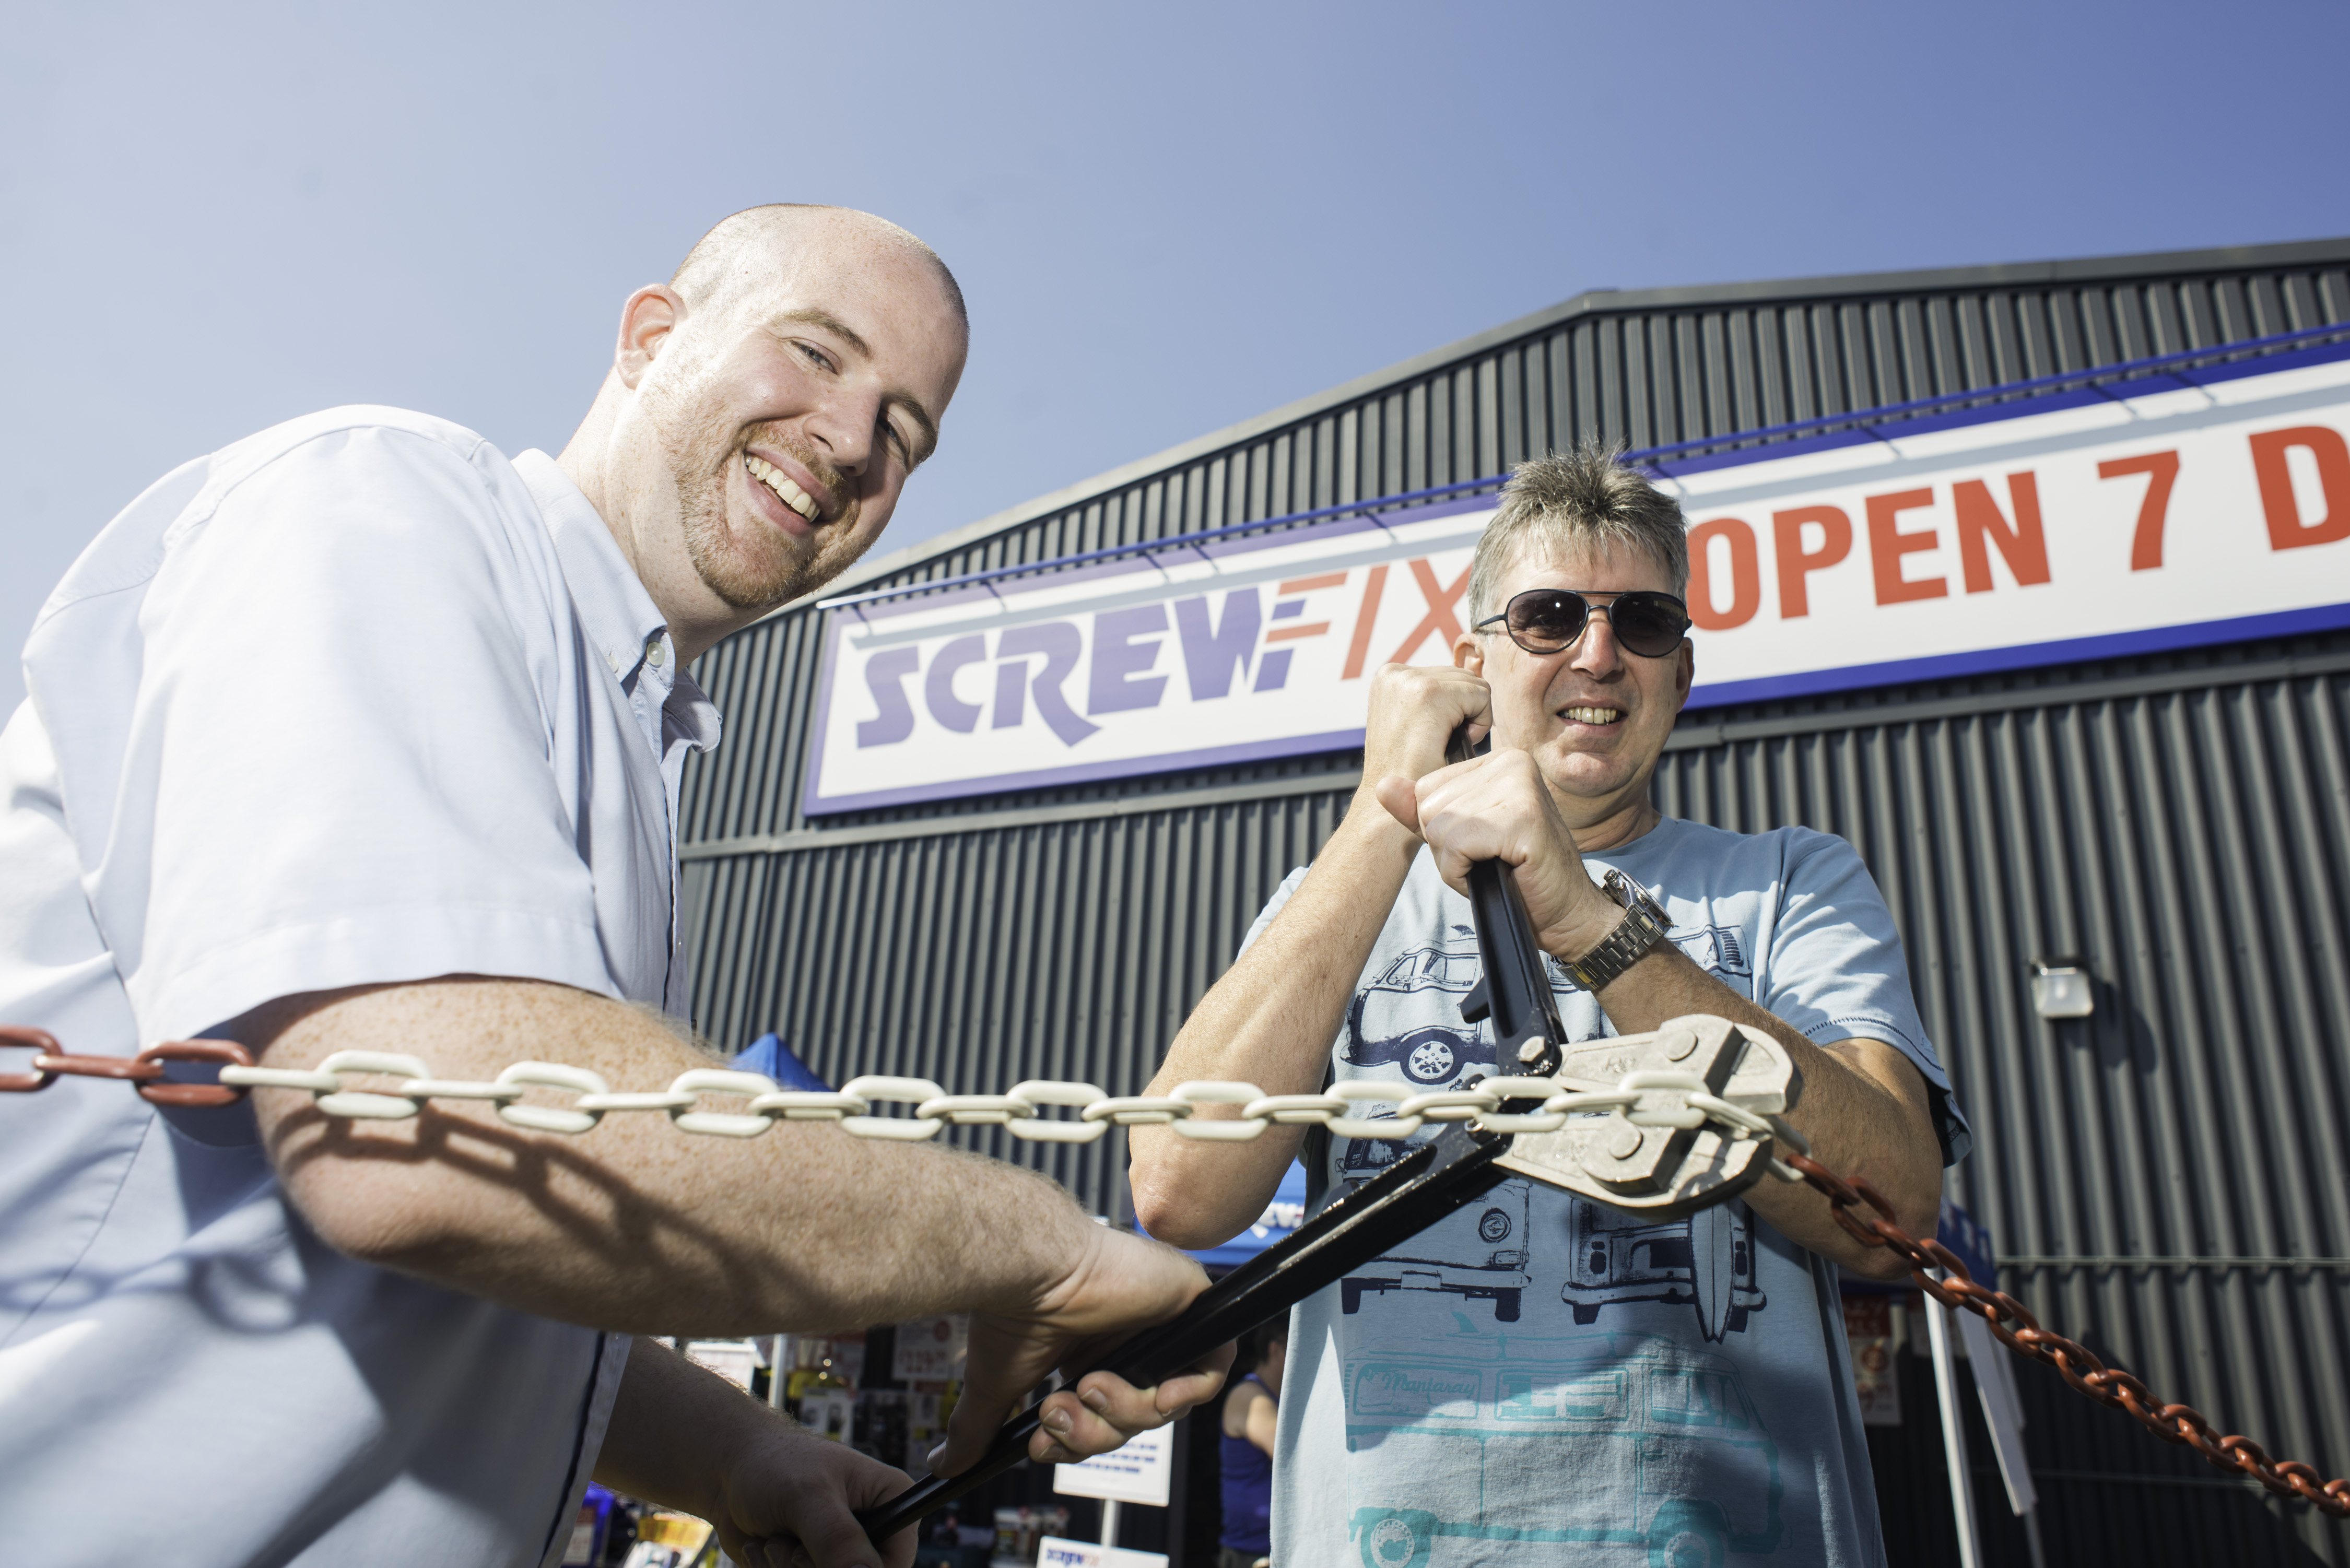 Thetford’s first Screwfix store is declared a runaway success